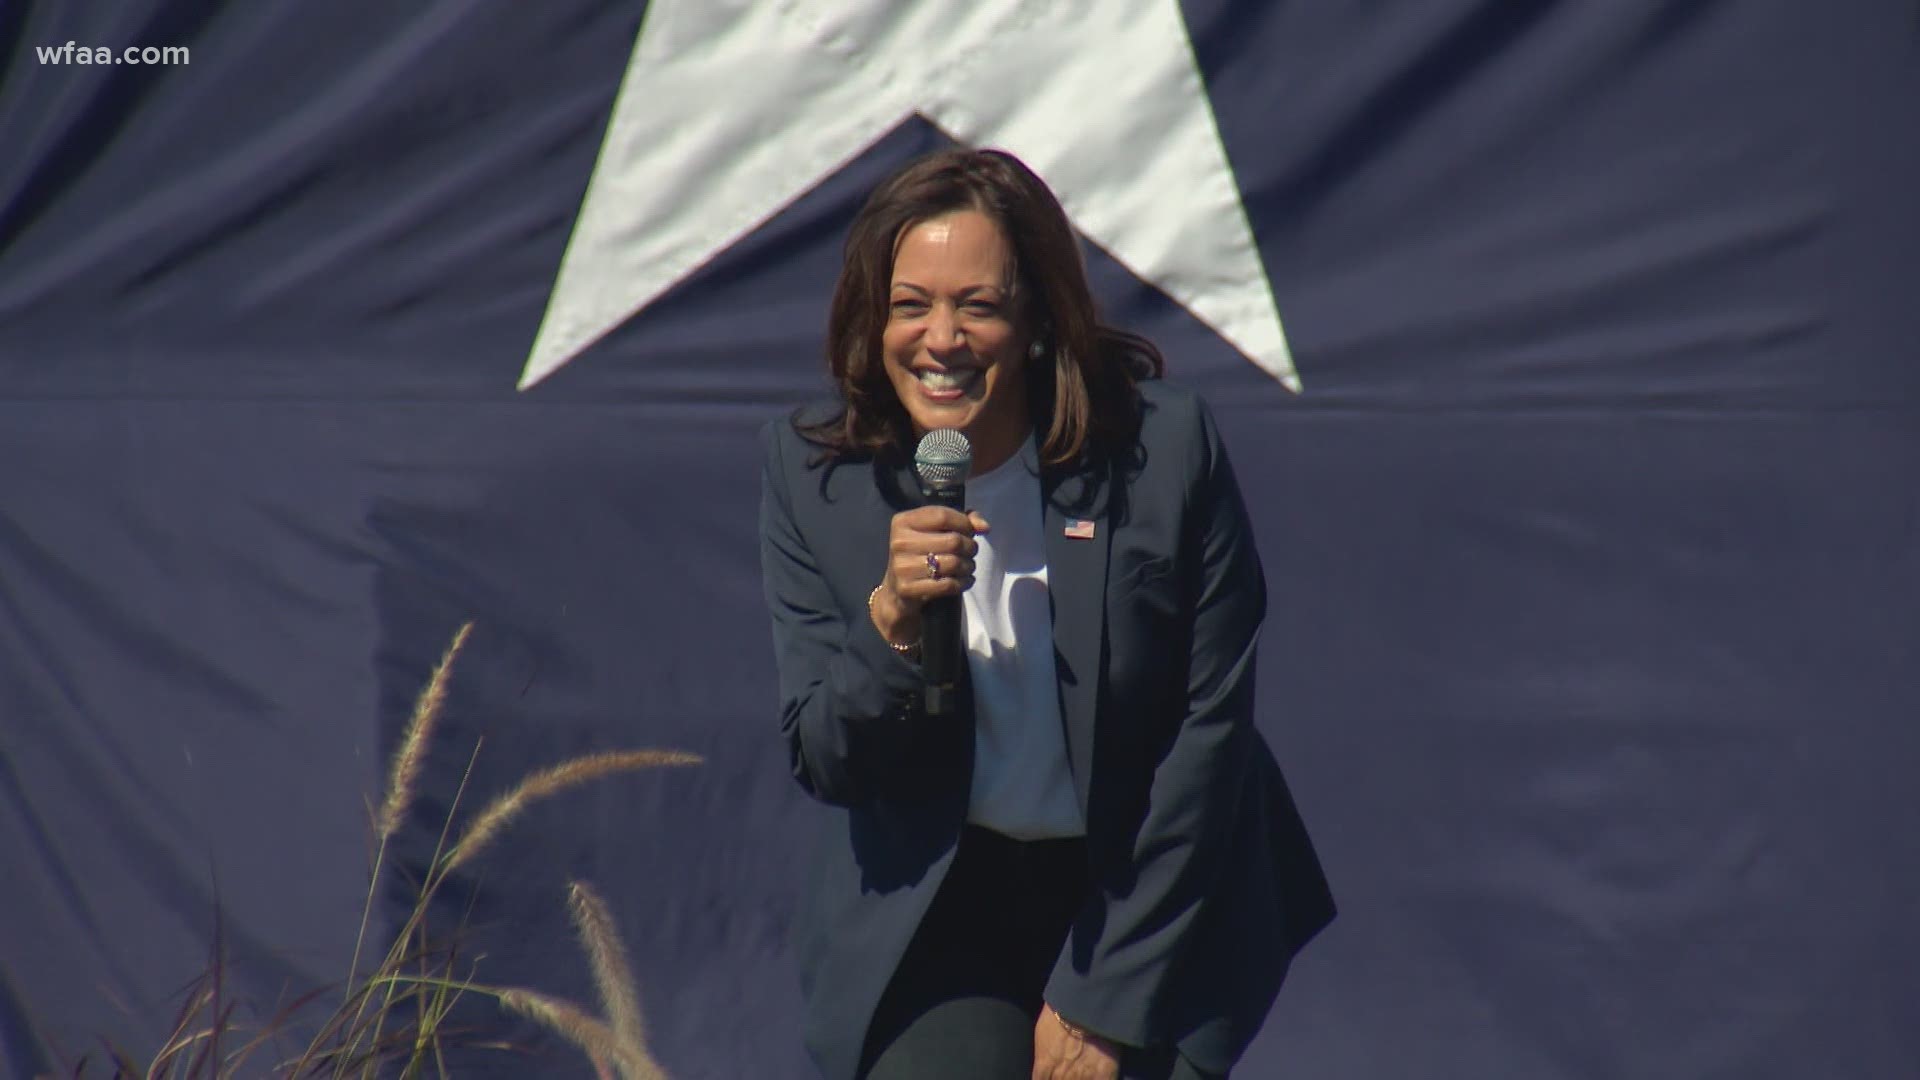 Harris spoke of the urgency of exercising what she called "your power" when going to the polls.